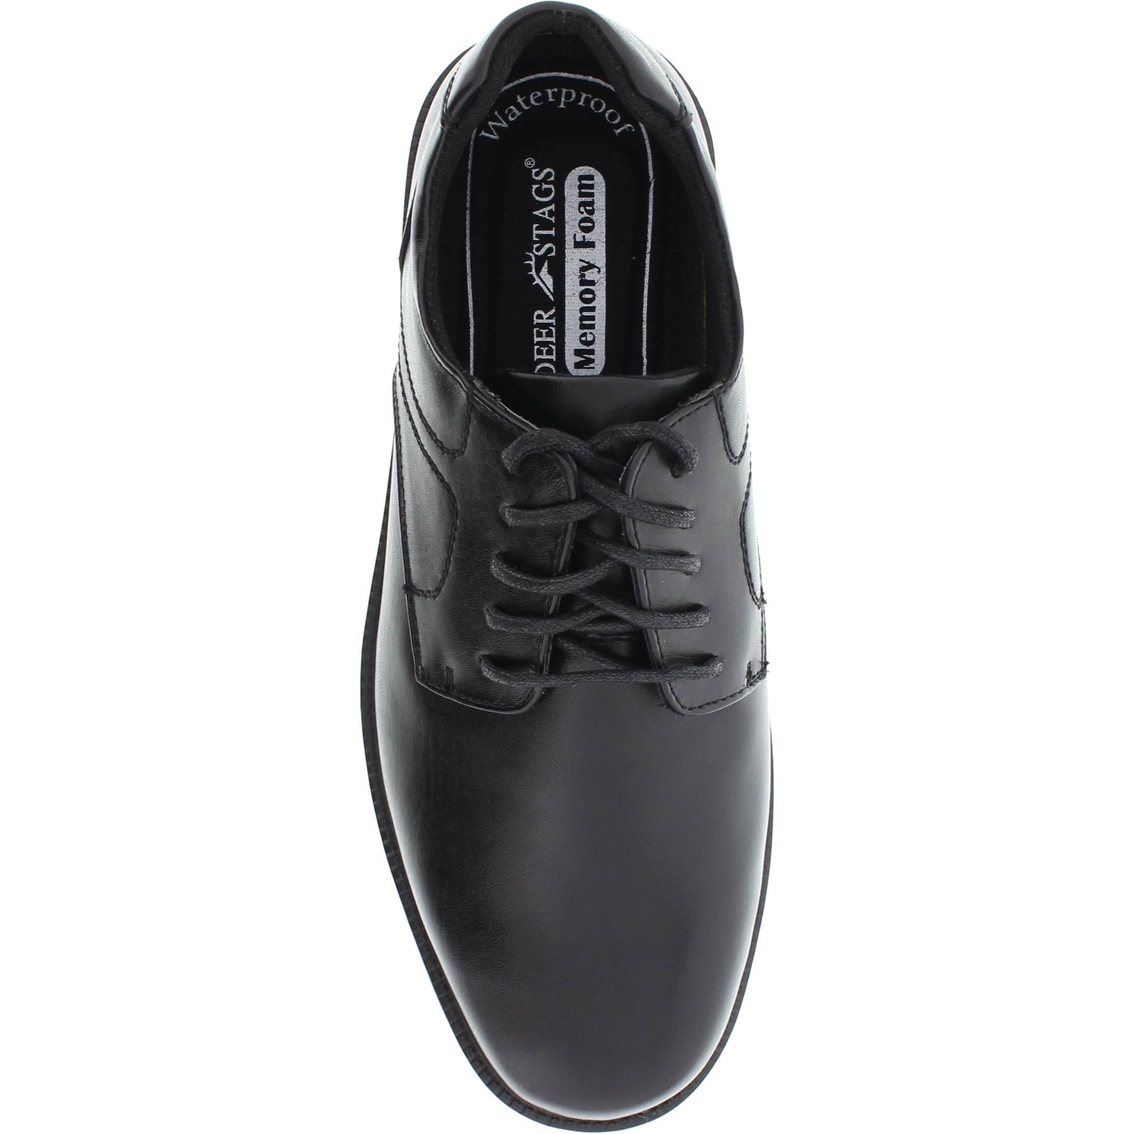 Deer Stags Nu Times Lace Up Oxford Shoes - Image 4 of 7